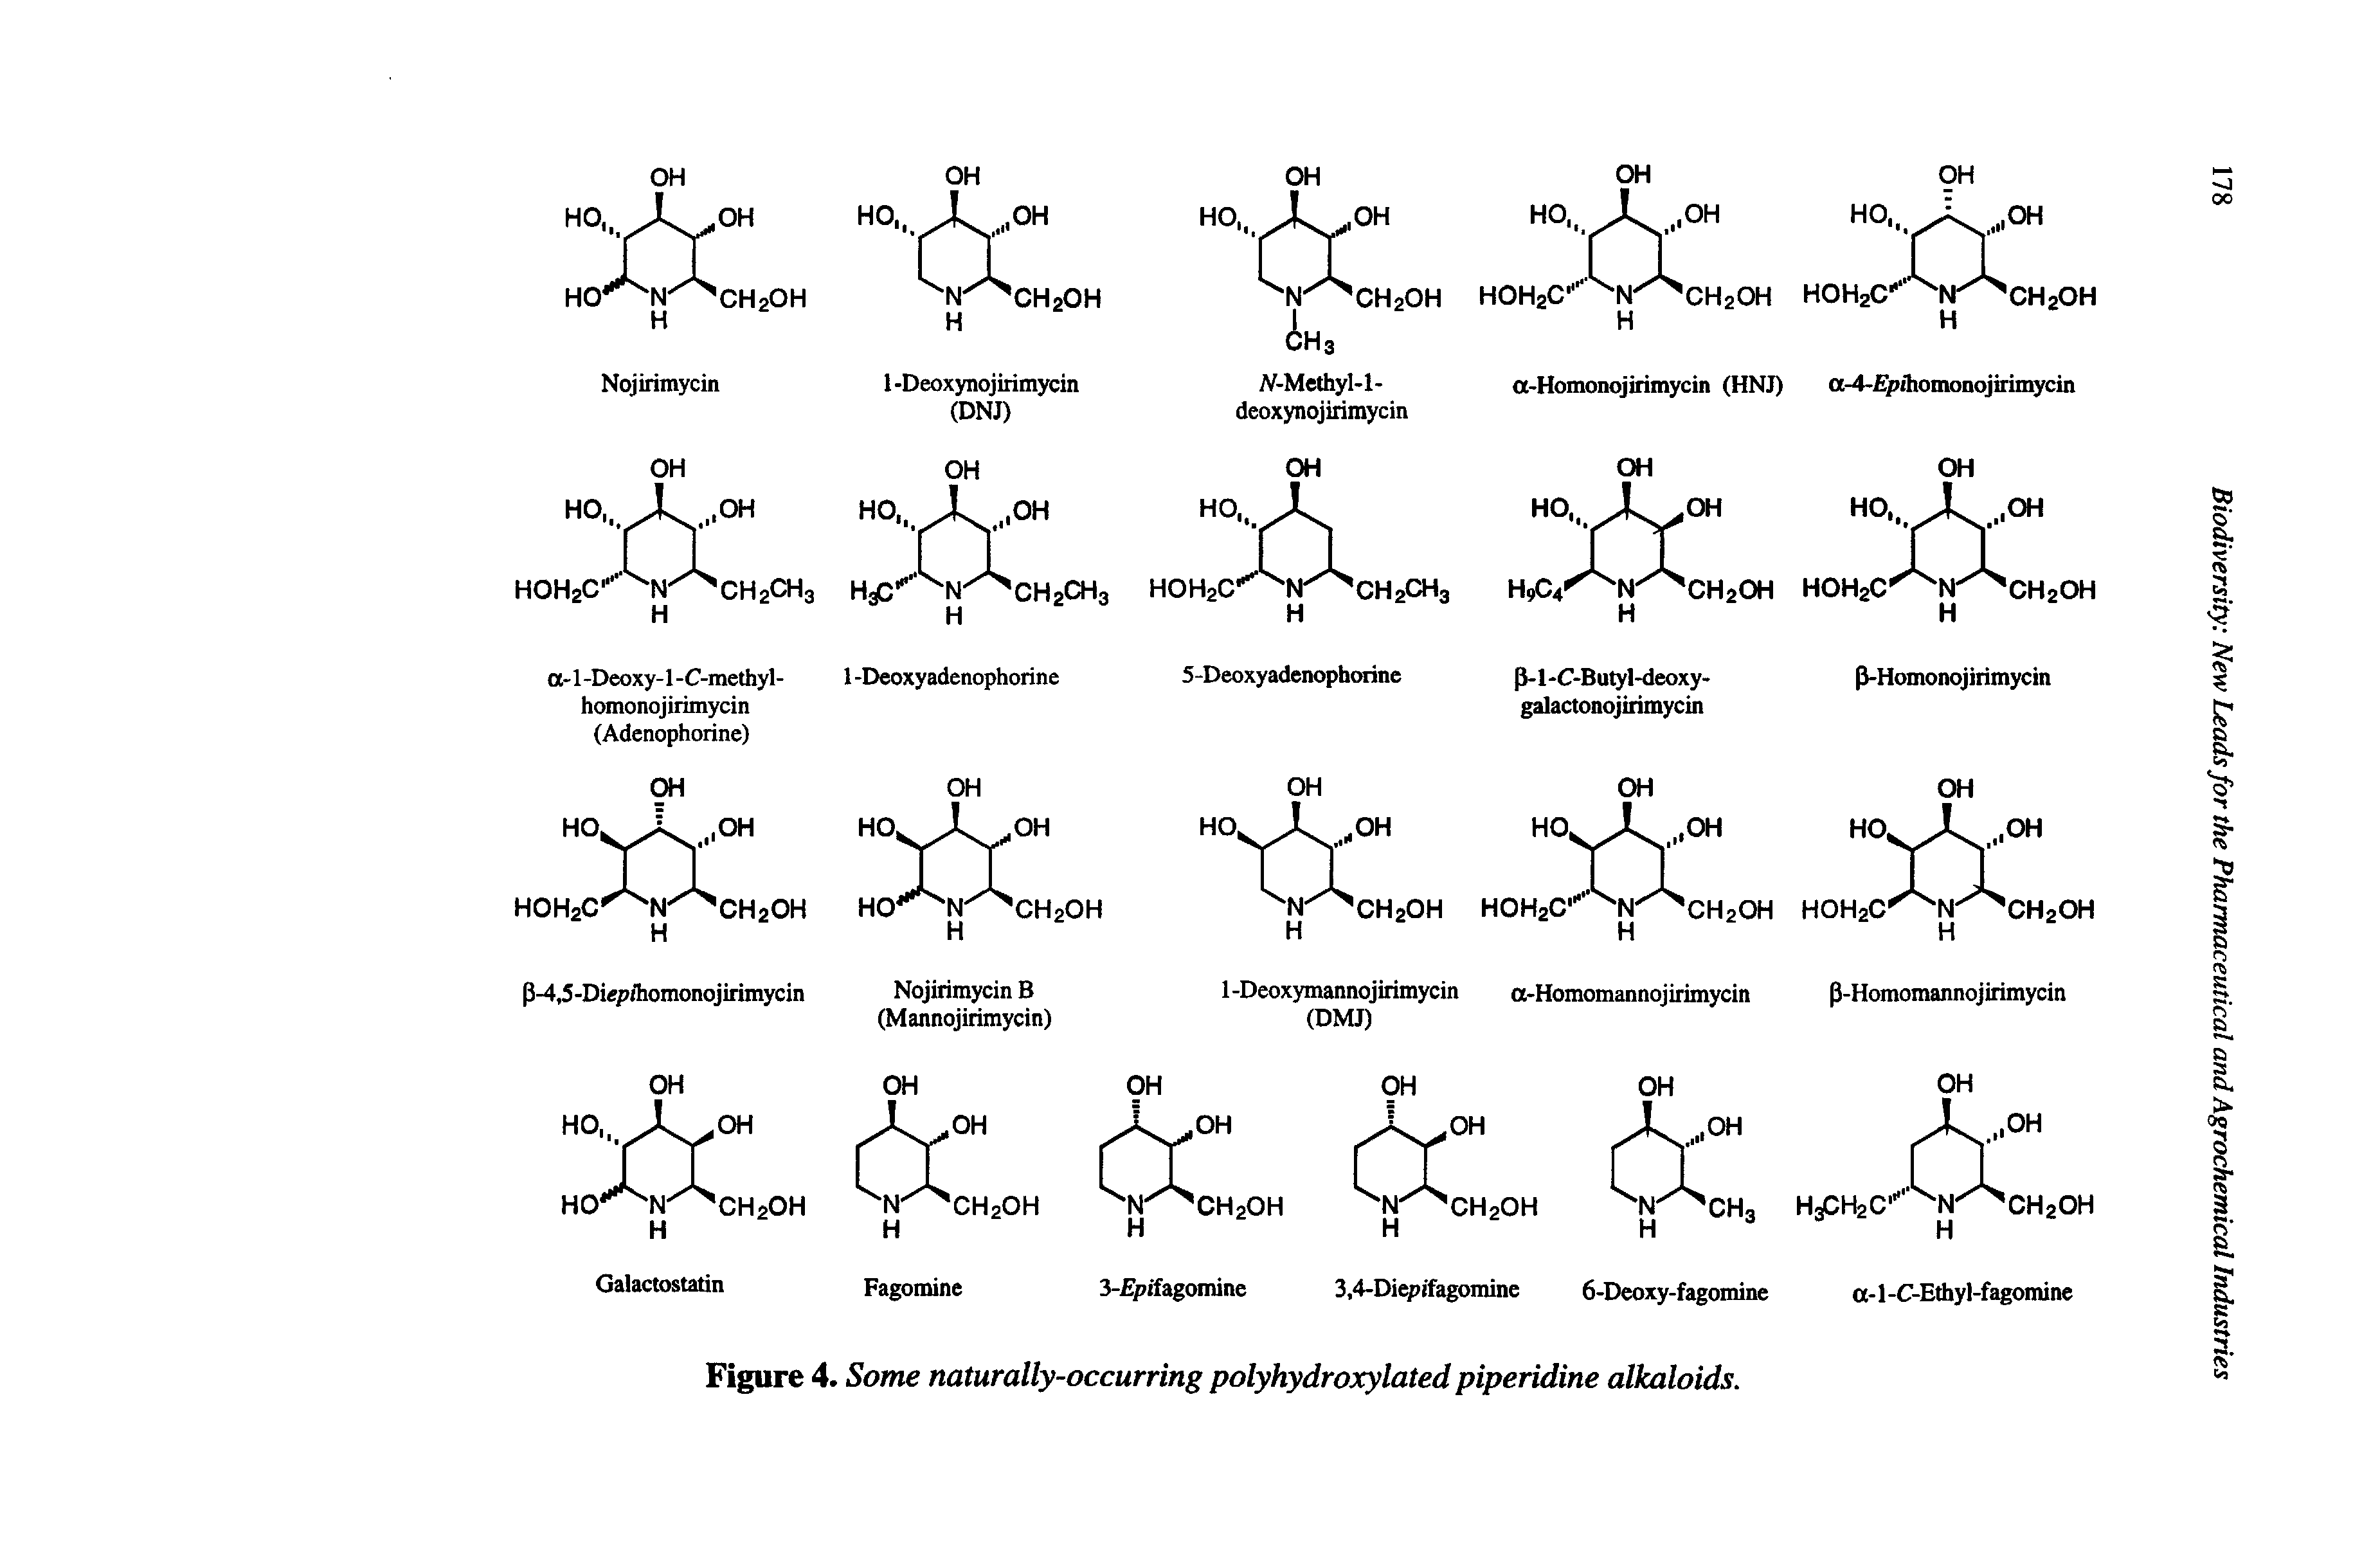 Figure 4. Some naturally-occurring polyhydroxylated piperidine alkaloids.